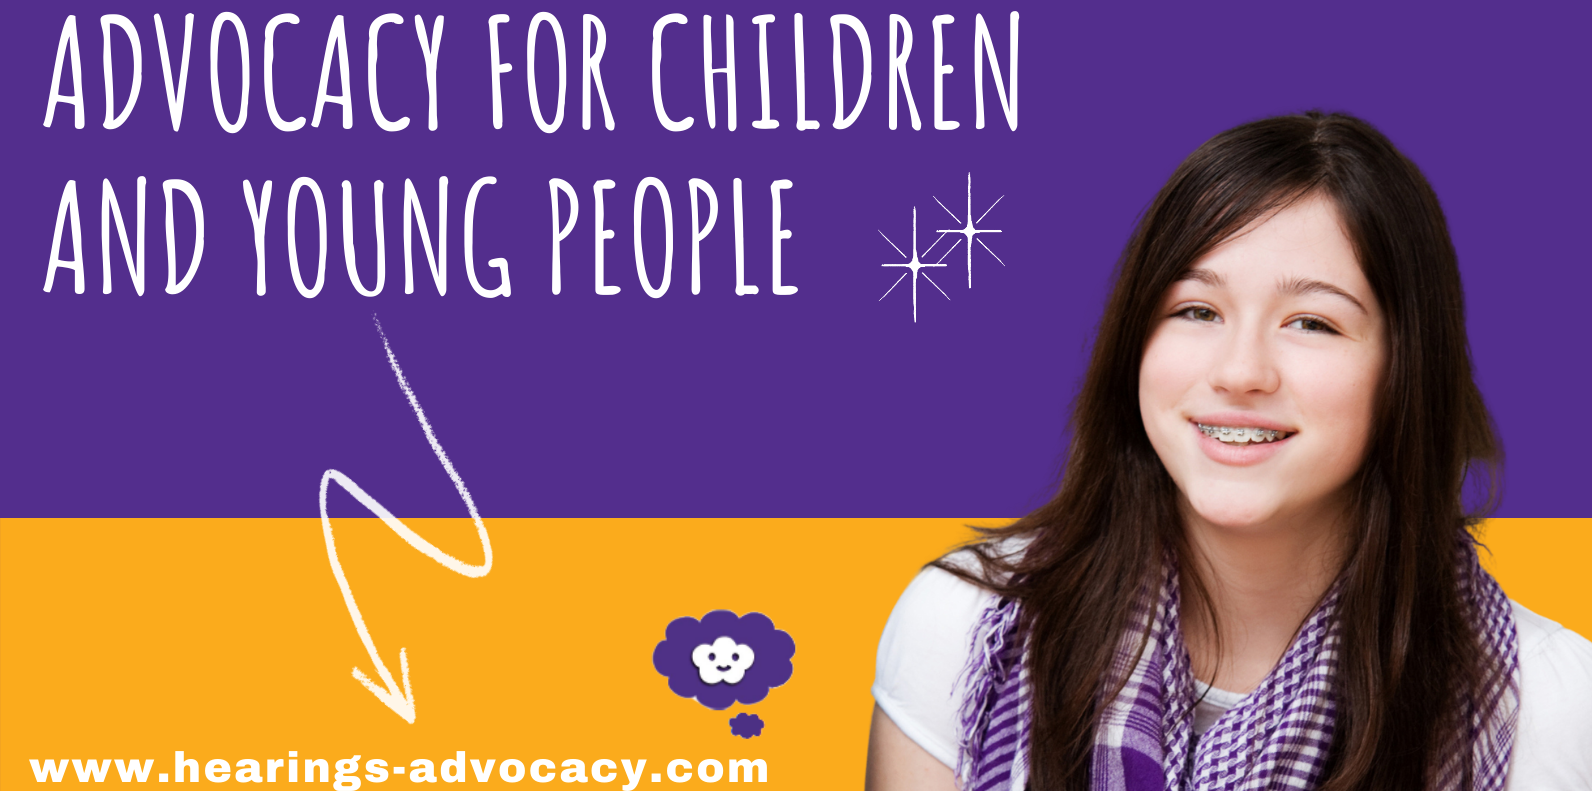 ADVOCACY FOR CHILDREN AND YOUNG PEOPLE blog post image